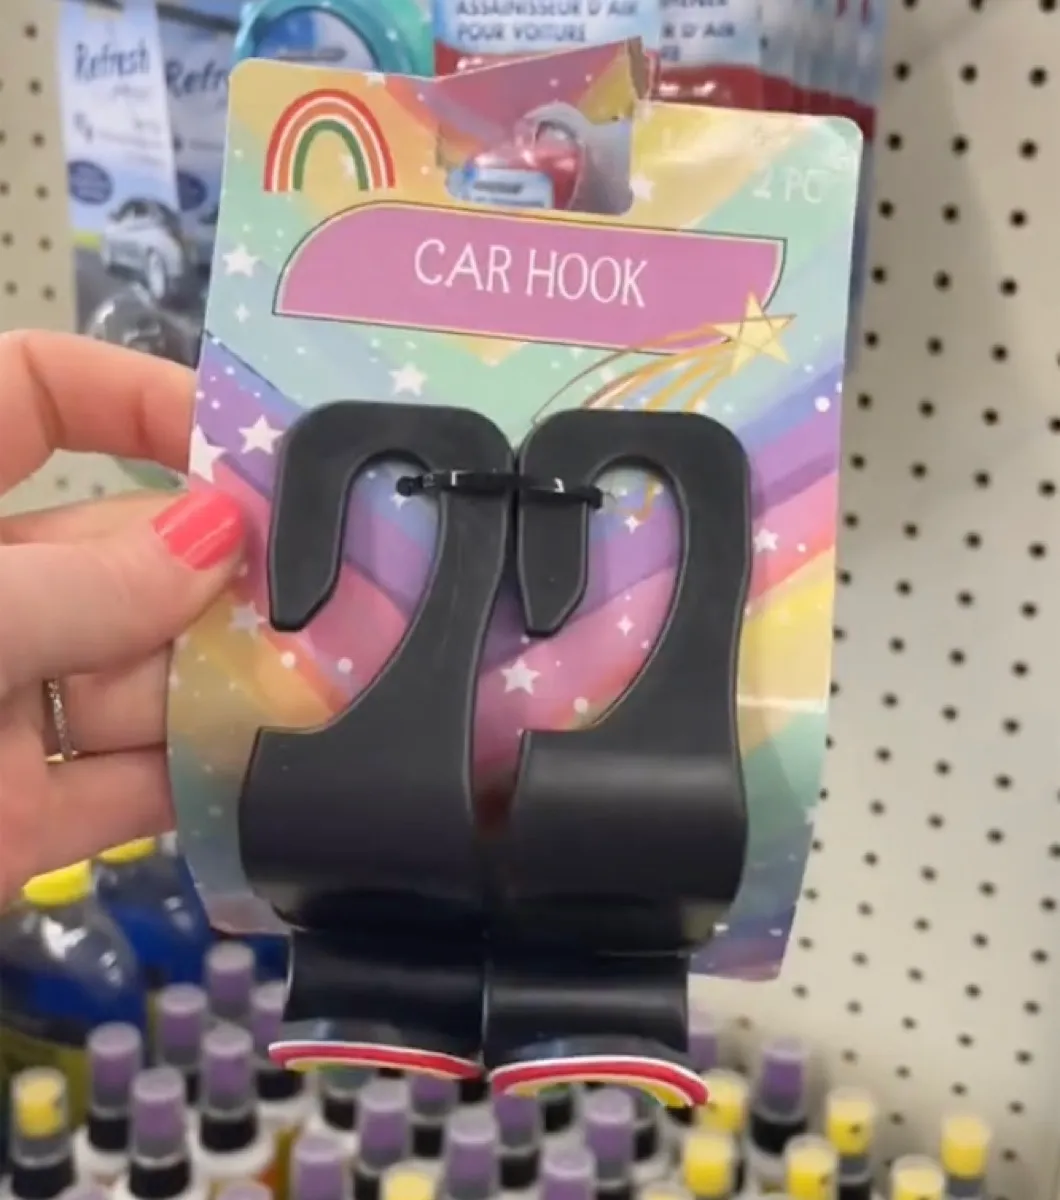 Woman's hand holding car hooks in store